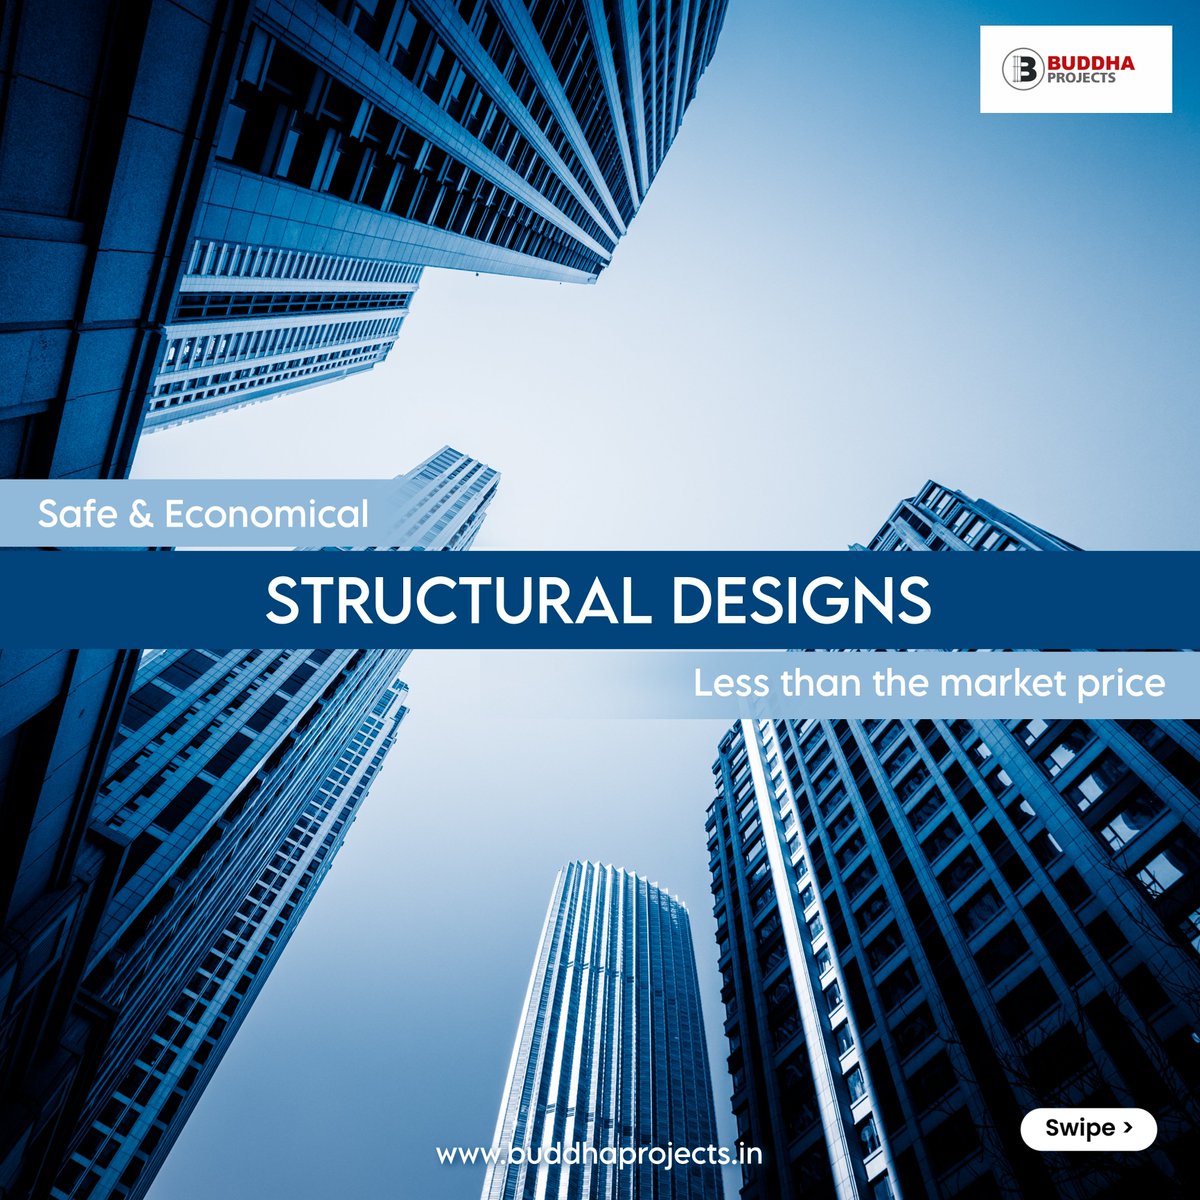 Contact us for all types of structural designs for Construction.                               

Er. Raja Gowtham
7095292505

#buddhaprojects #rajagowtham #hyderabad #structuraldesigns #civilengineers #architects #builders